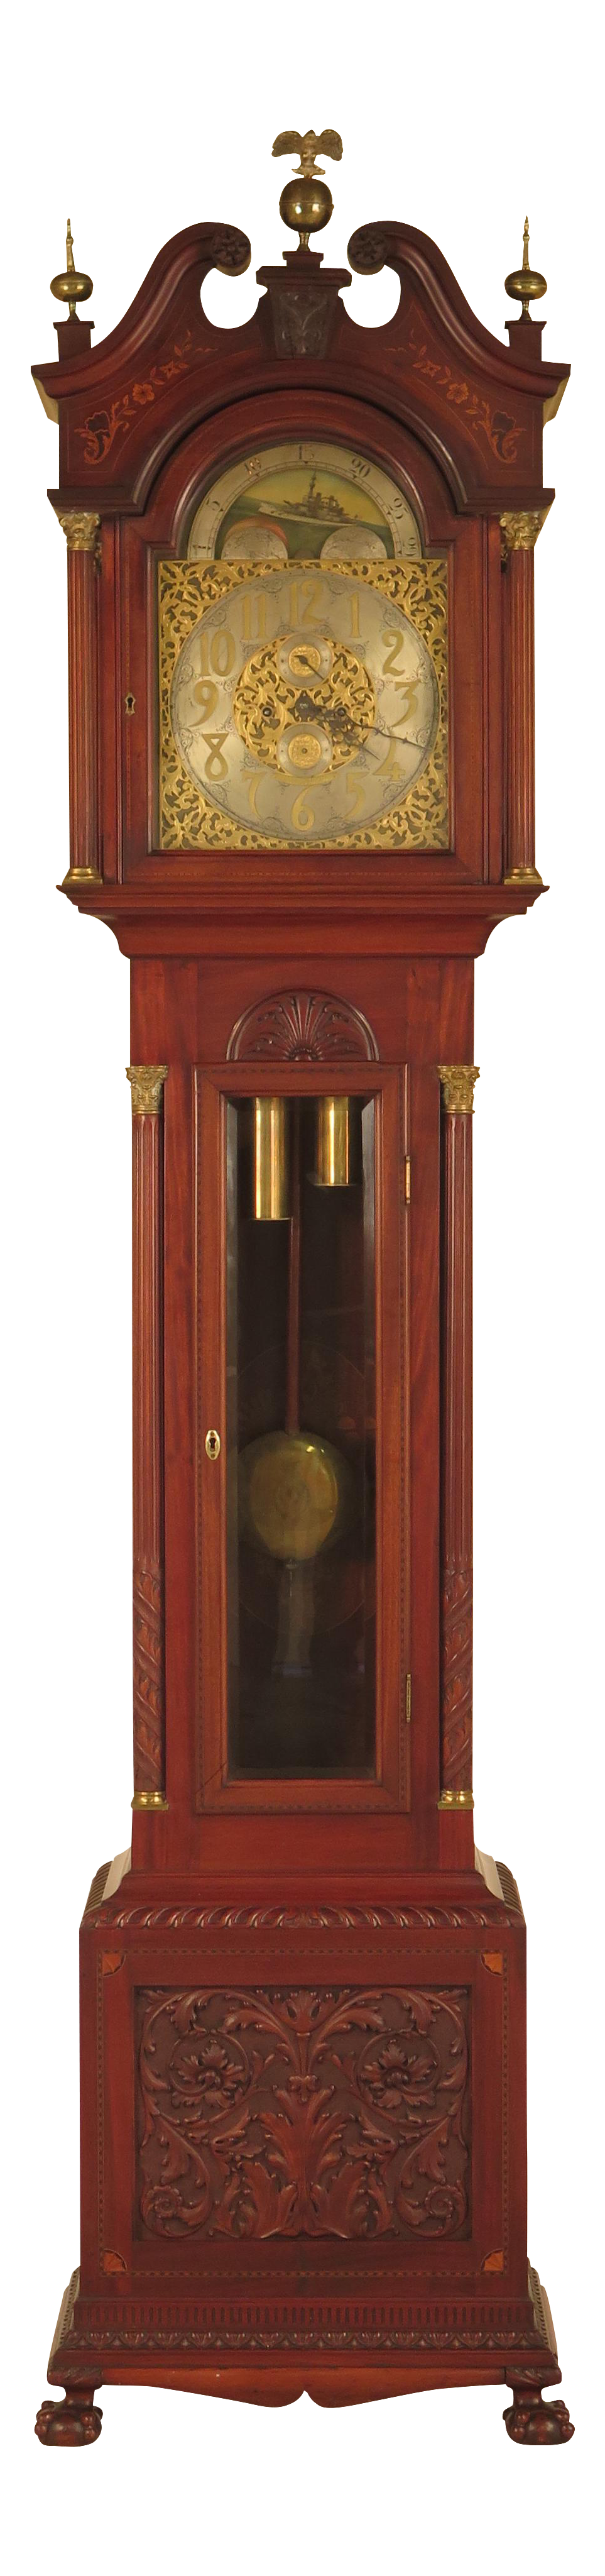 Grandfather clock PNG Picture